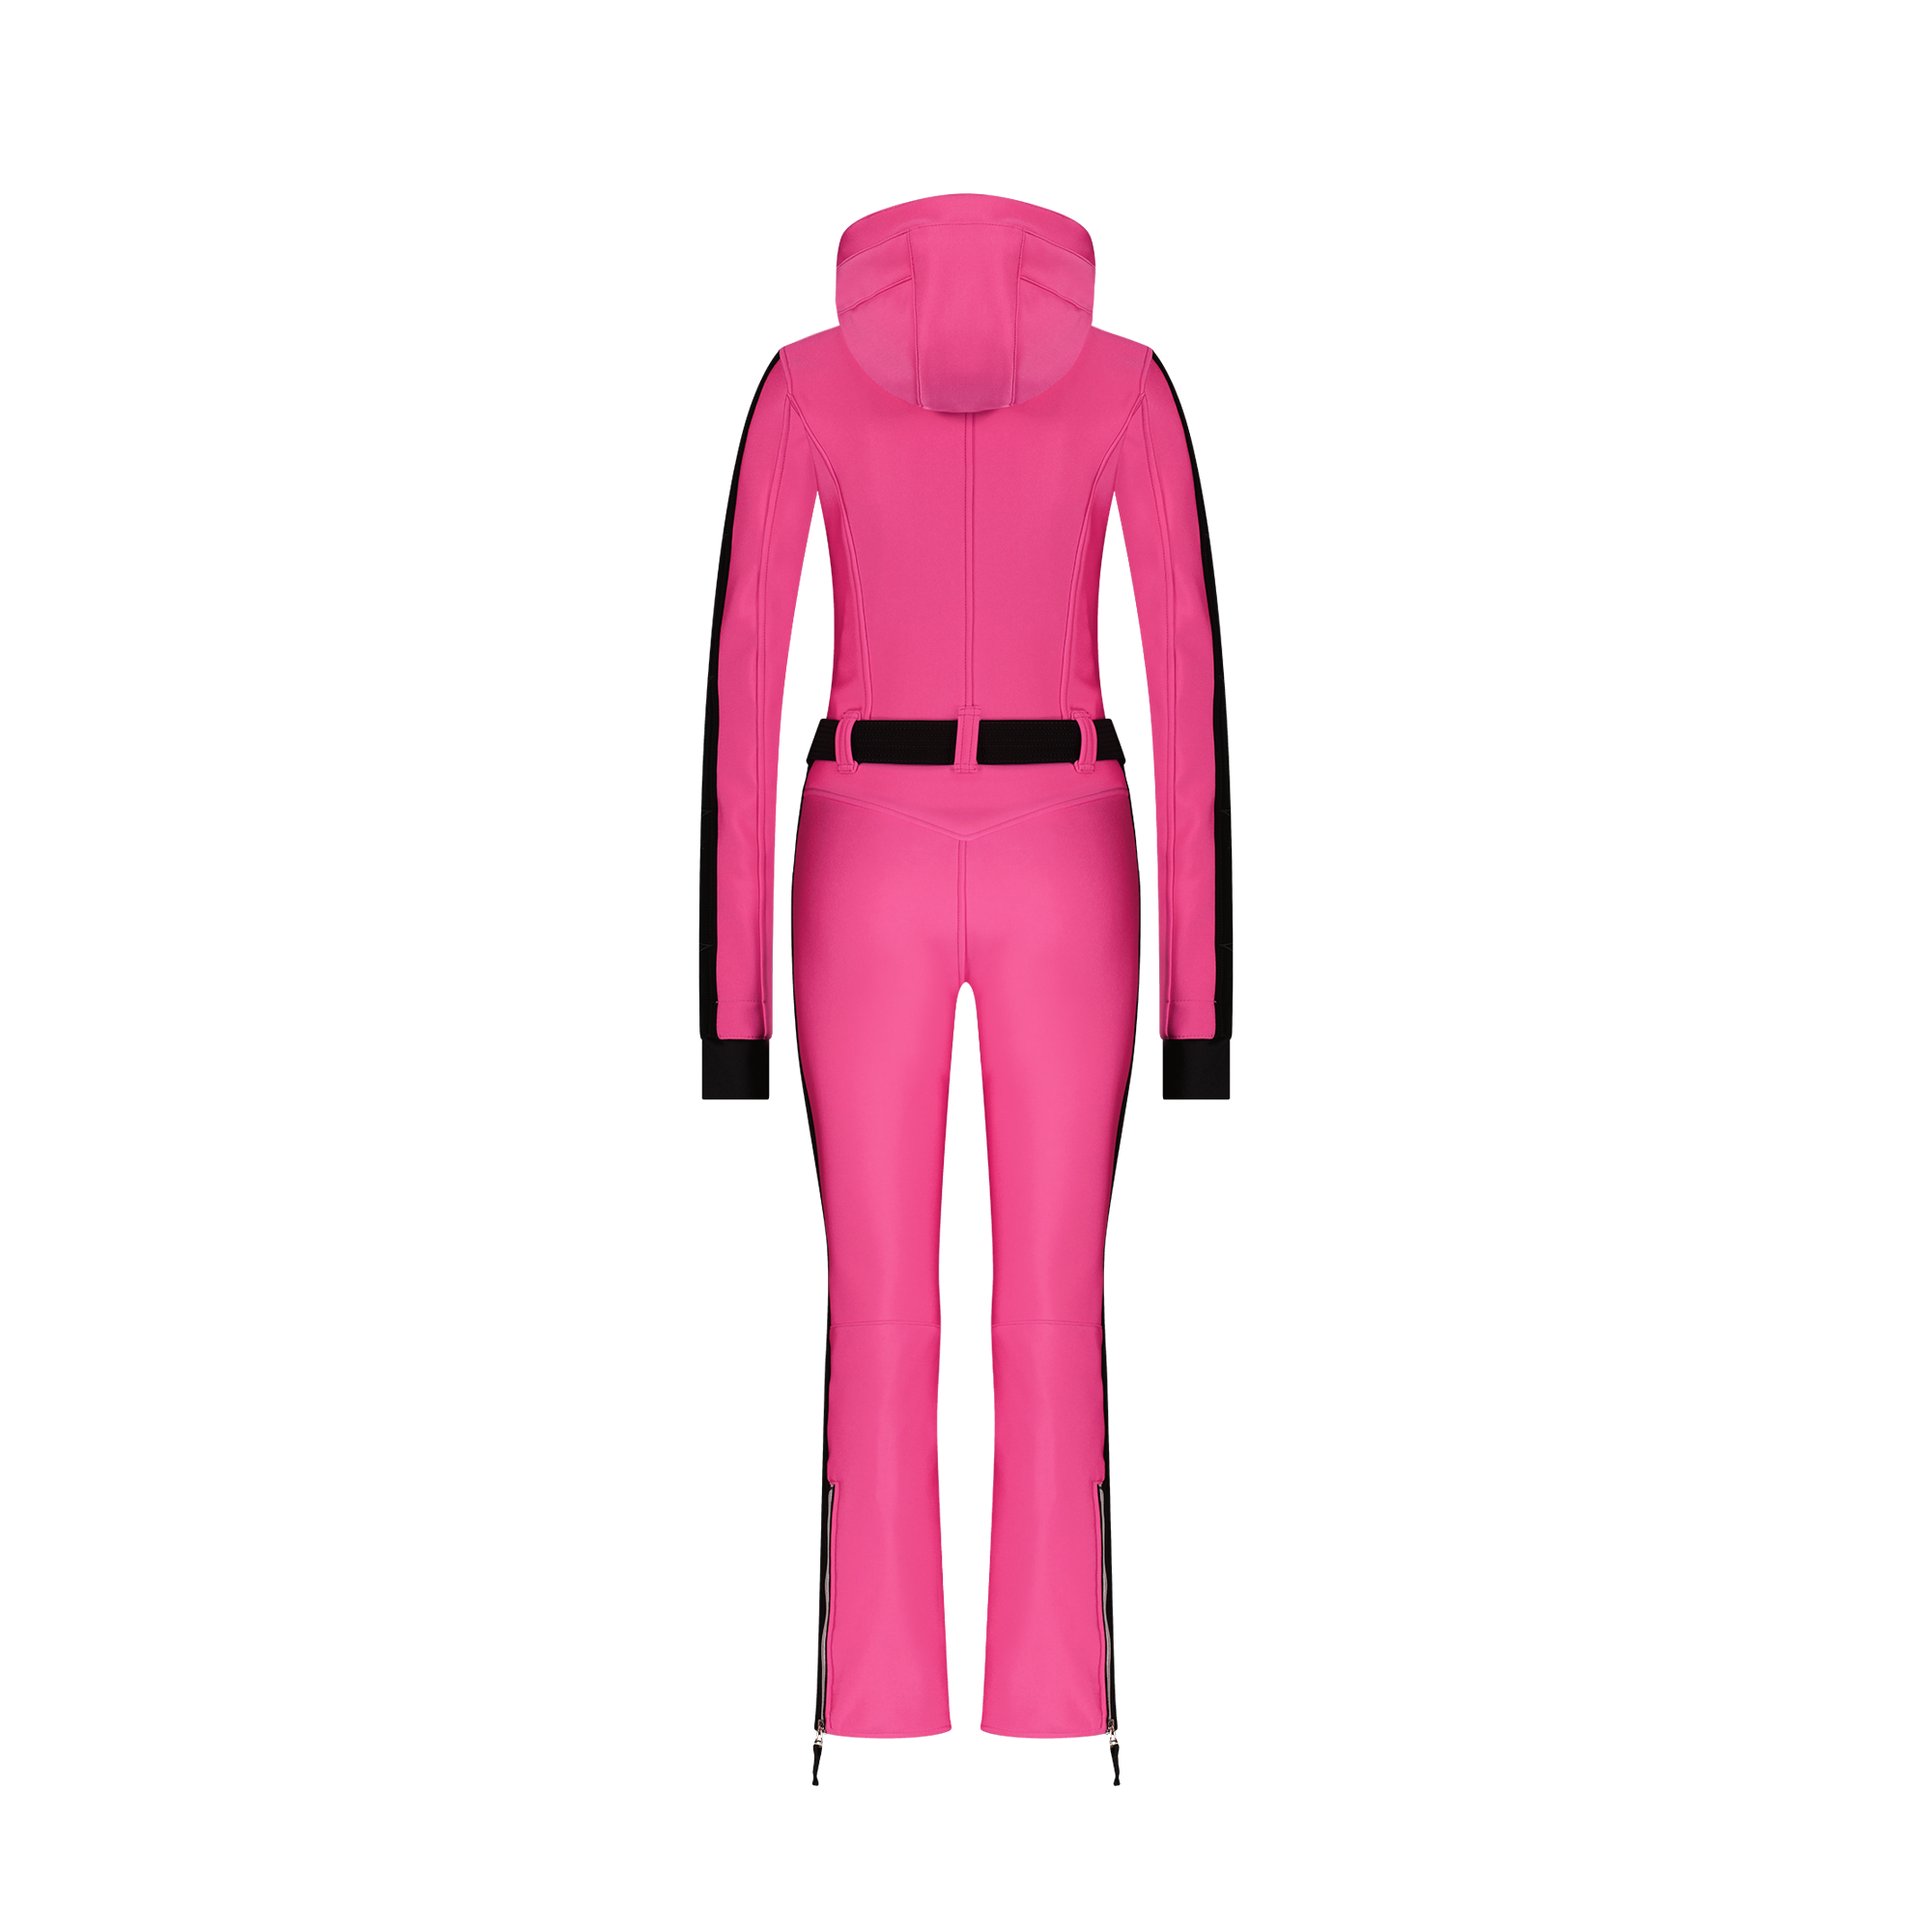 Ski Outfits to Order Now from  - A Jetset Journal